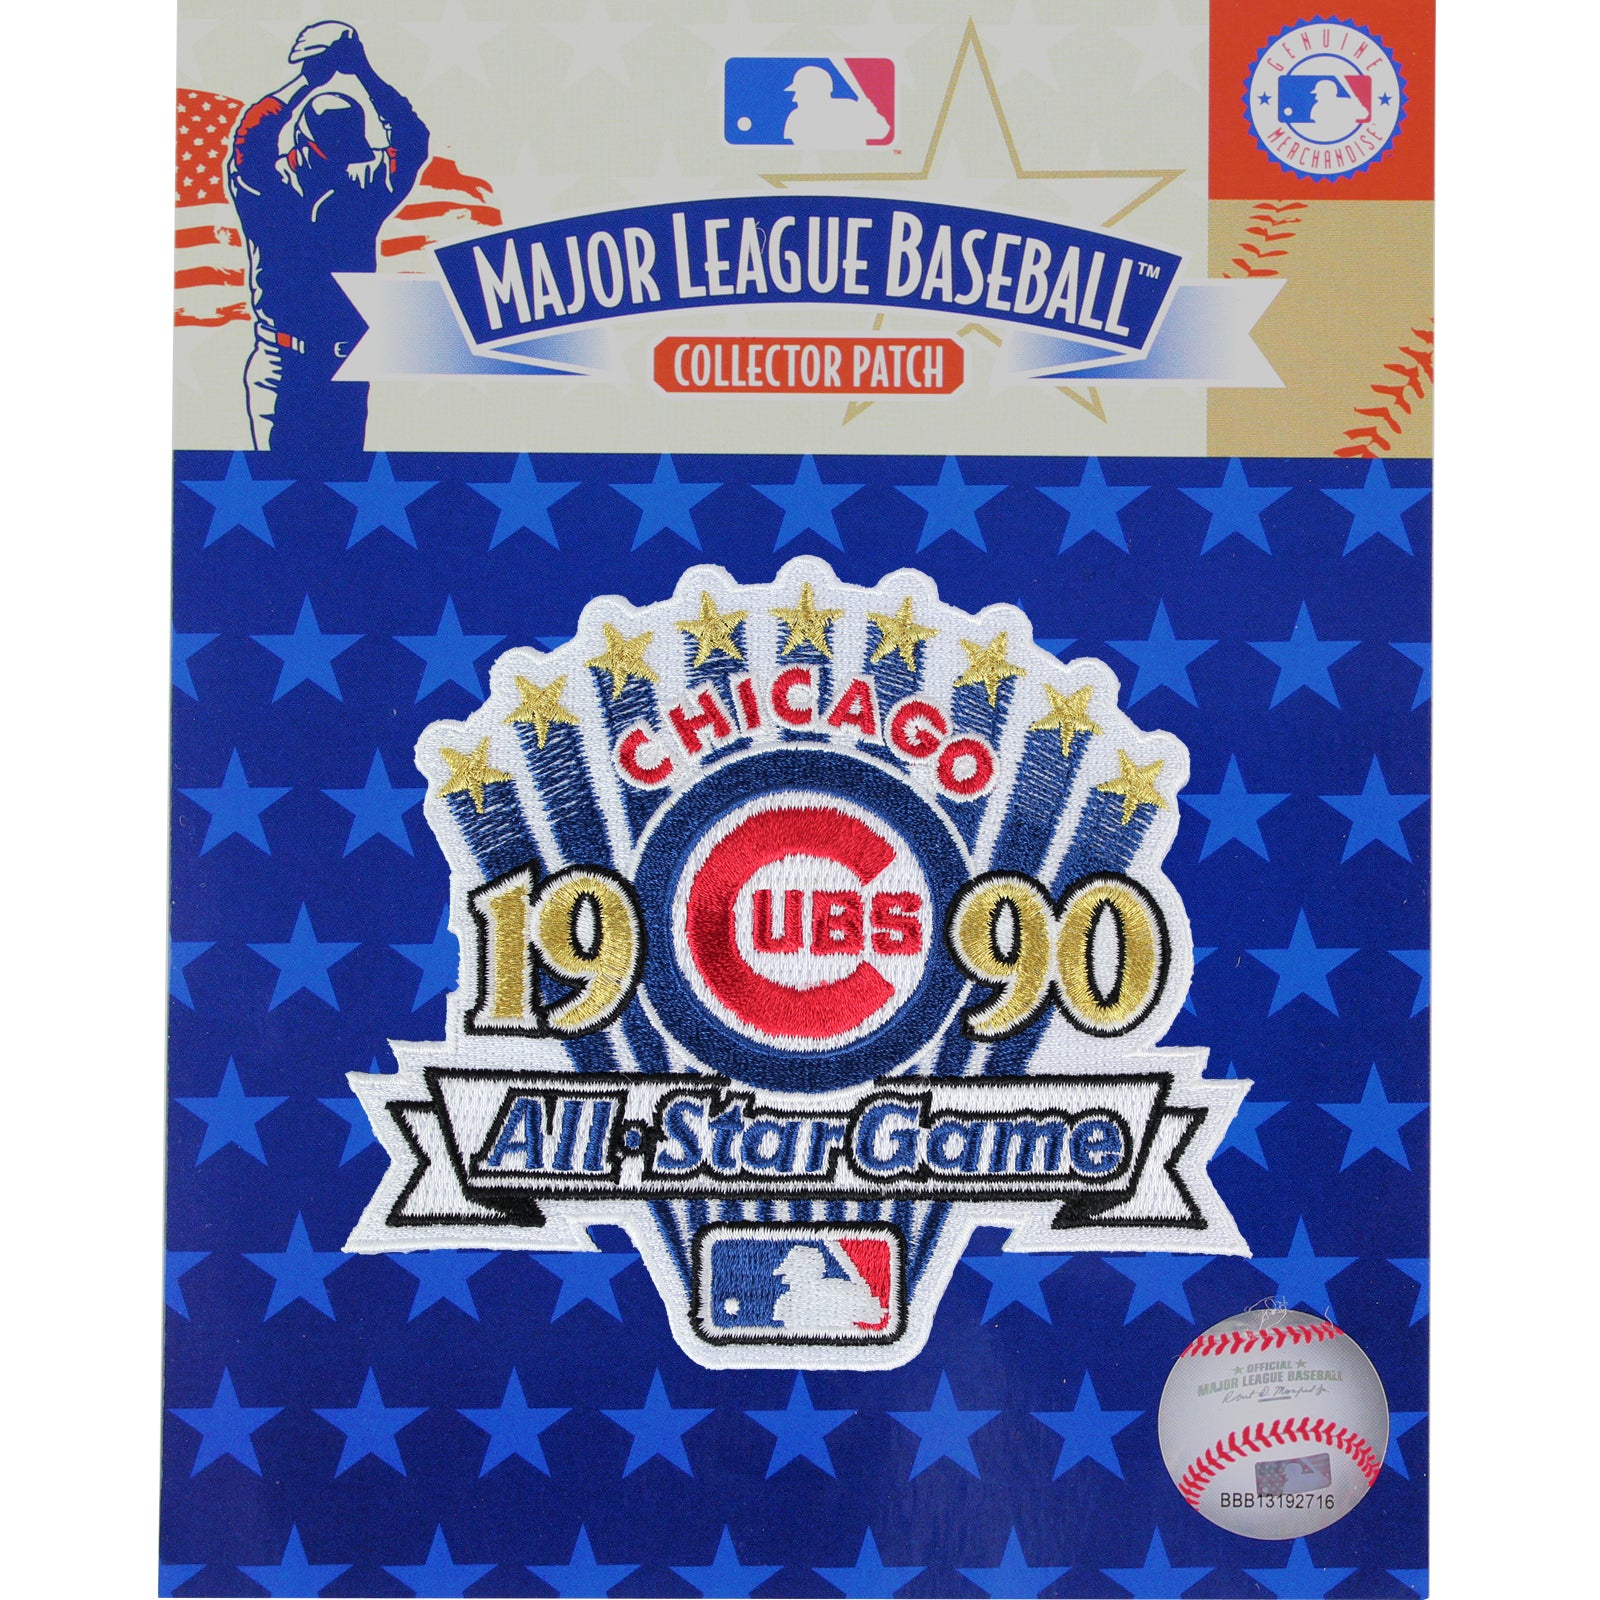 Chicago Cubs All Star Game Gear, Cubs All Star Game Jerseys, All Star Game  Merchandise